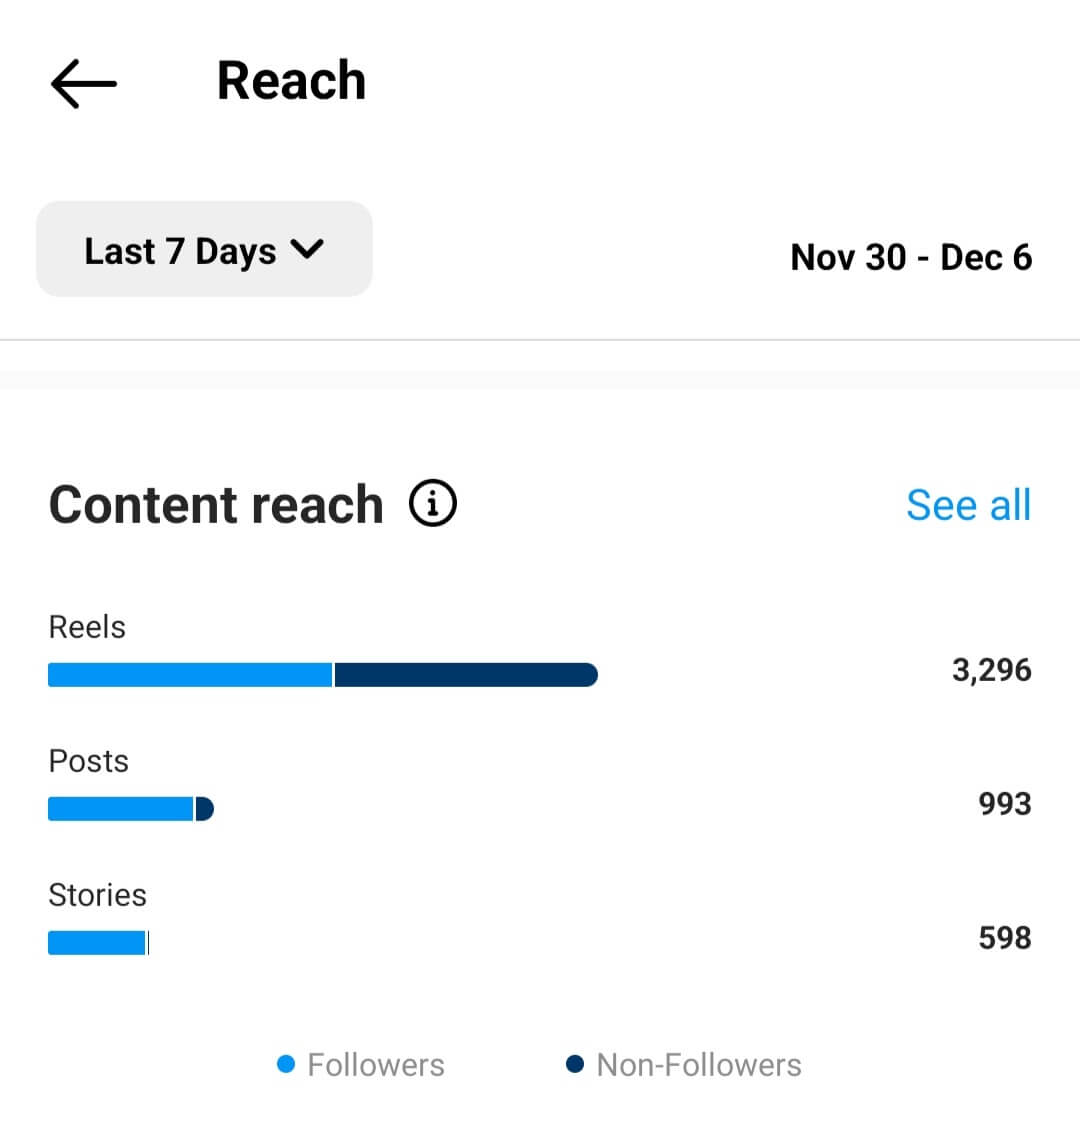 how-to-design-a-well-rounded-content-plan-on-instagram-reach-engagement-formats-top-posts-stories-reels-example-5